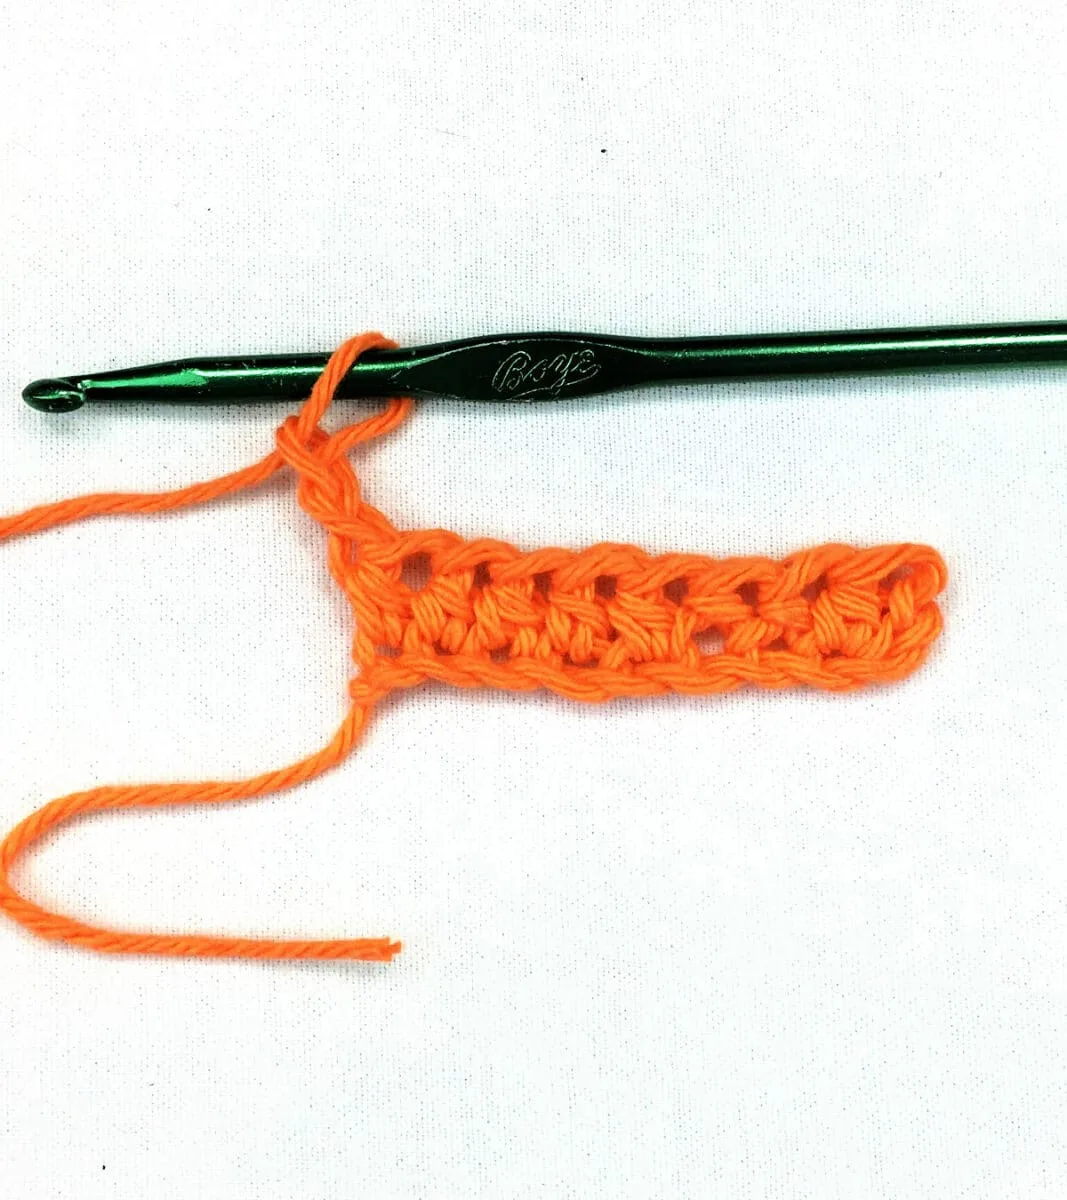 orange yarn and a green crochet hook working a half double stitch against a white background